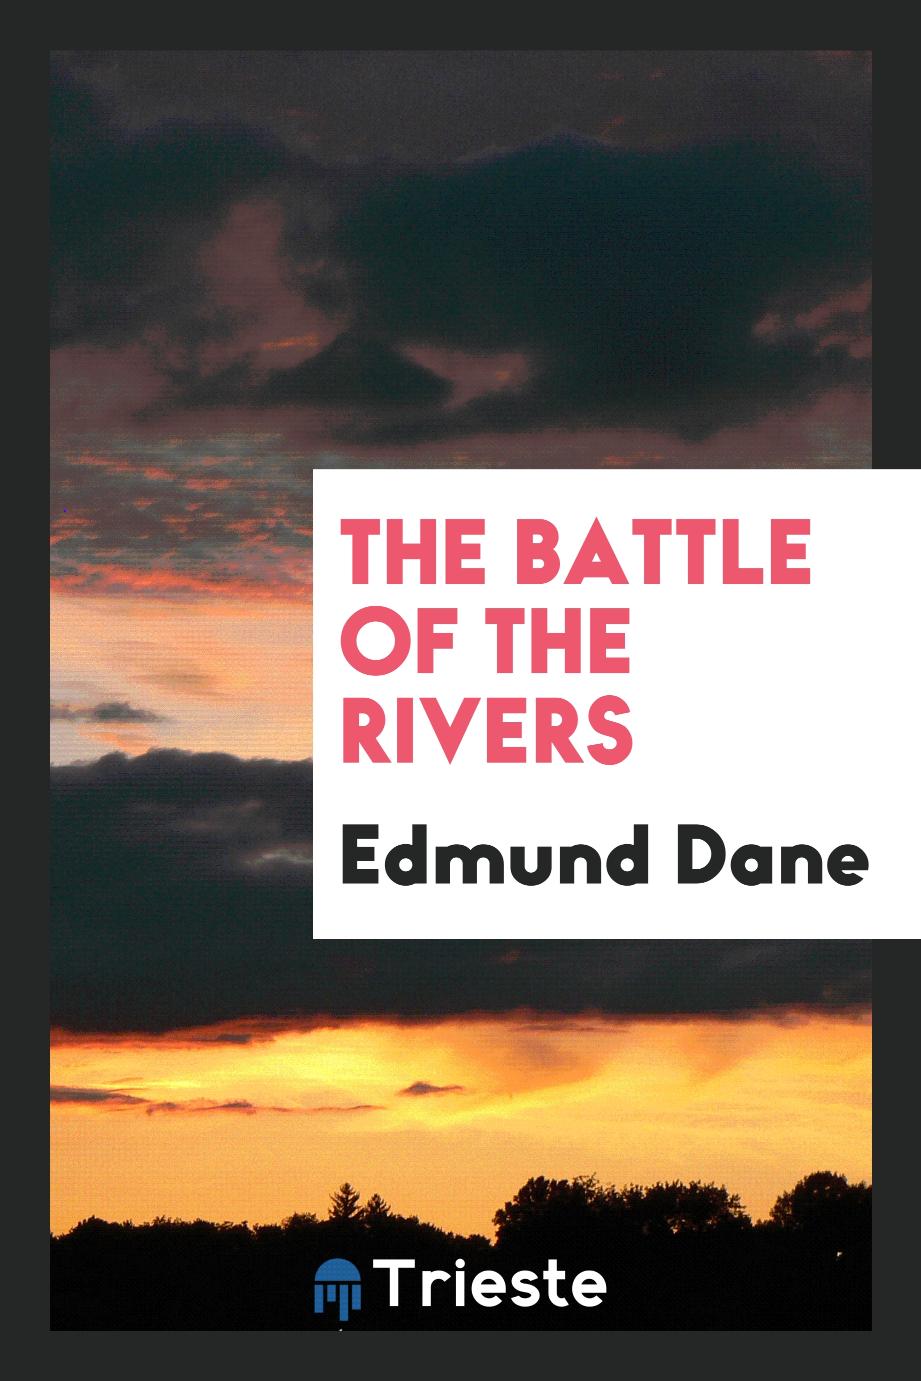 The battle of the rivers